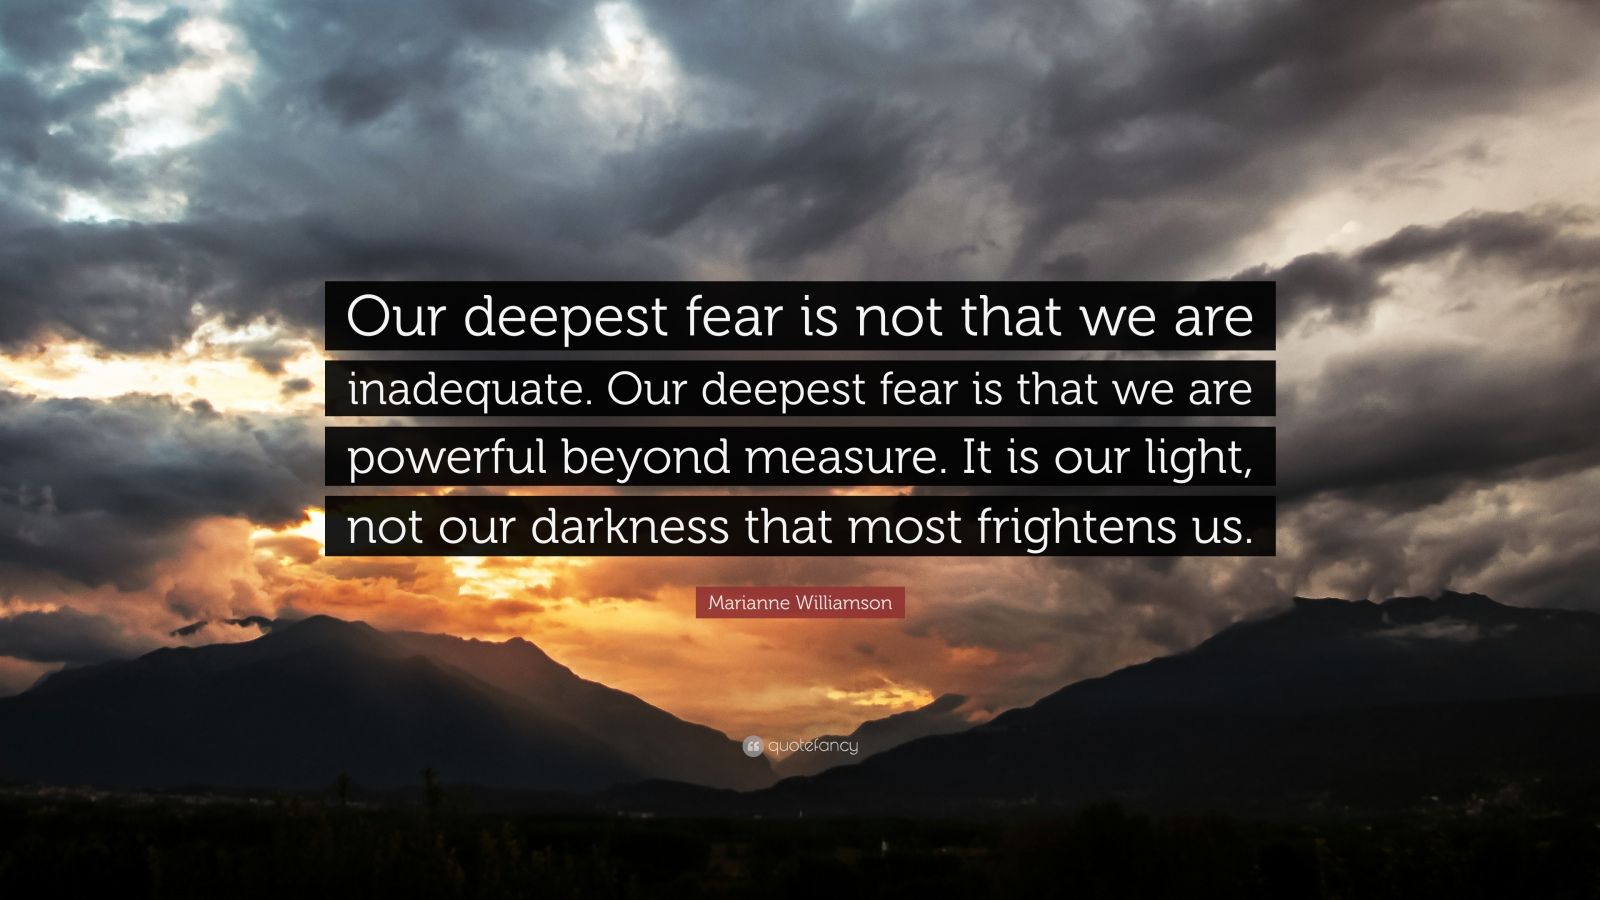 Marianne Williamson Quote: “Our deepest fear is not that we are